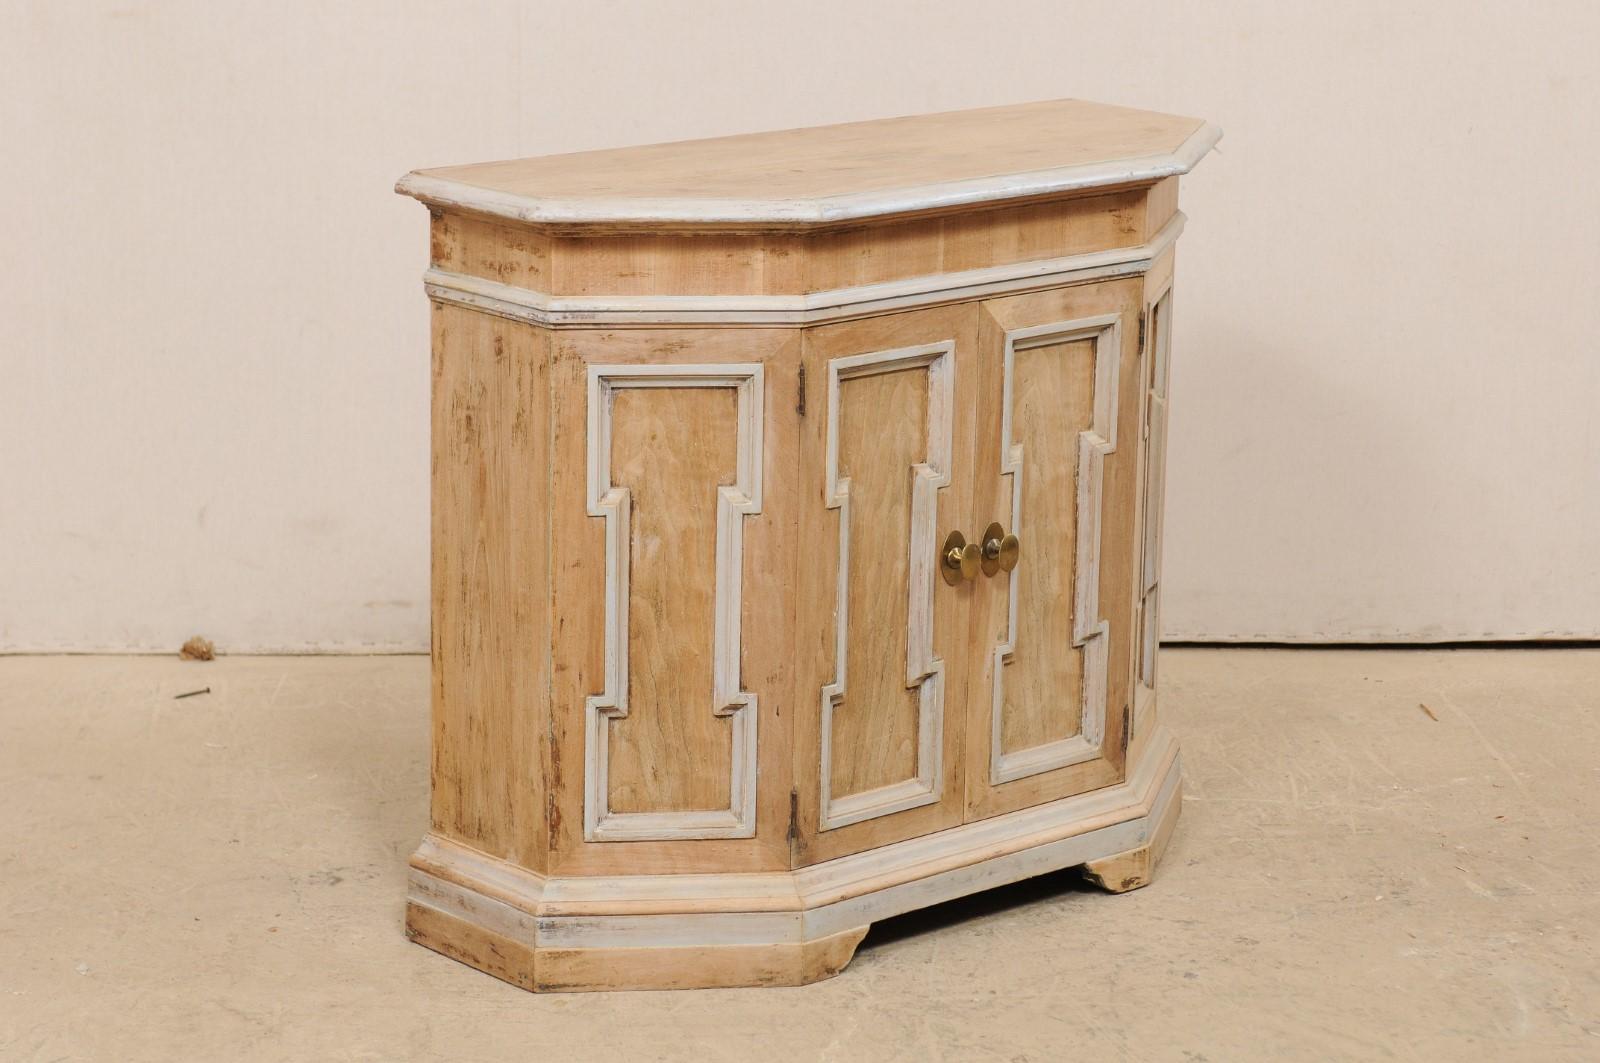 Italian Bleached Wood Console Cabinet with Blue/Gray Trim, Cute Petite Size 3